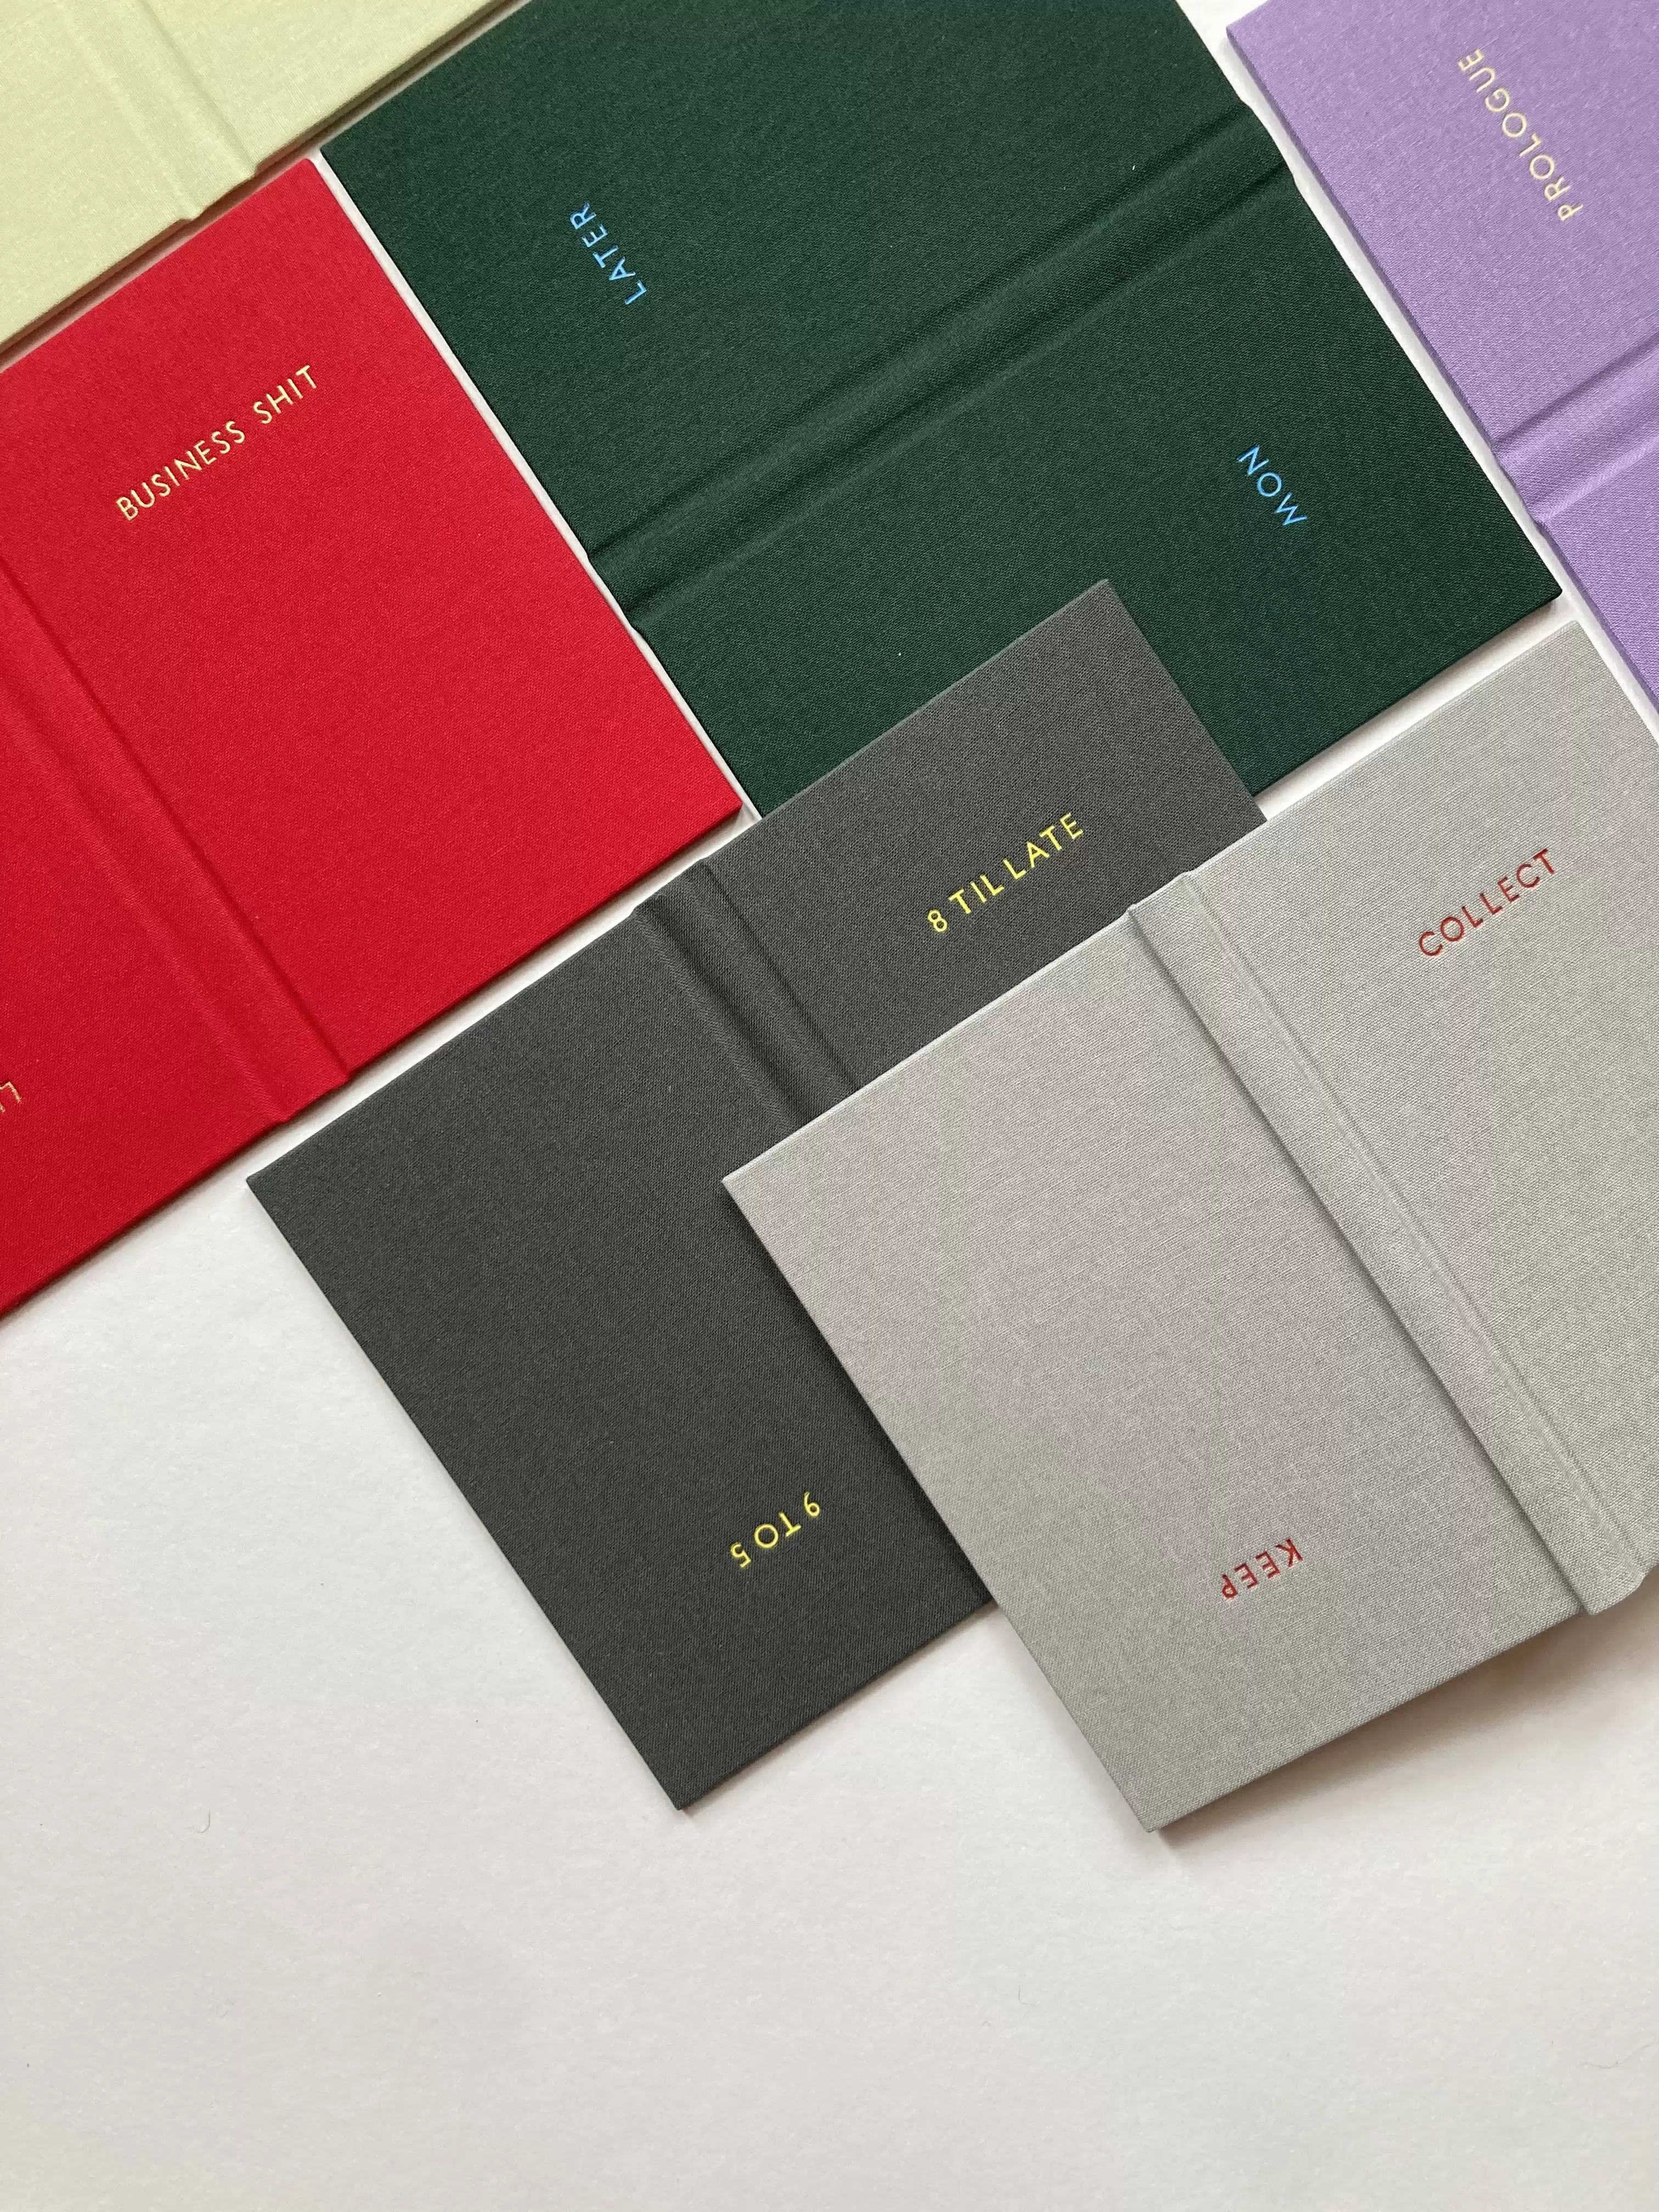 Handmade double fronted pocket sized note books in a variety of colours with bespoke foiled lettering